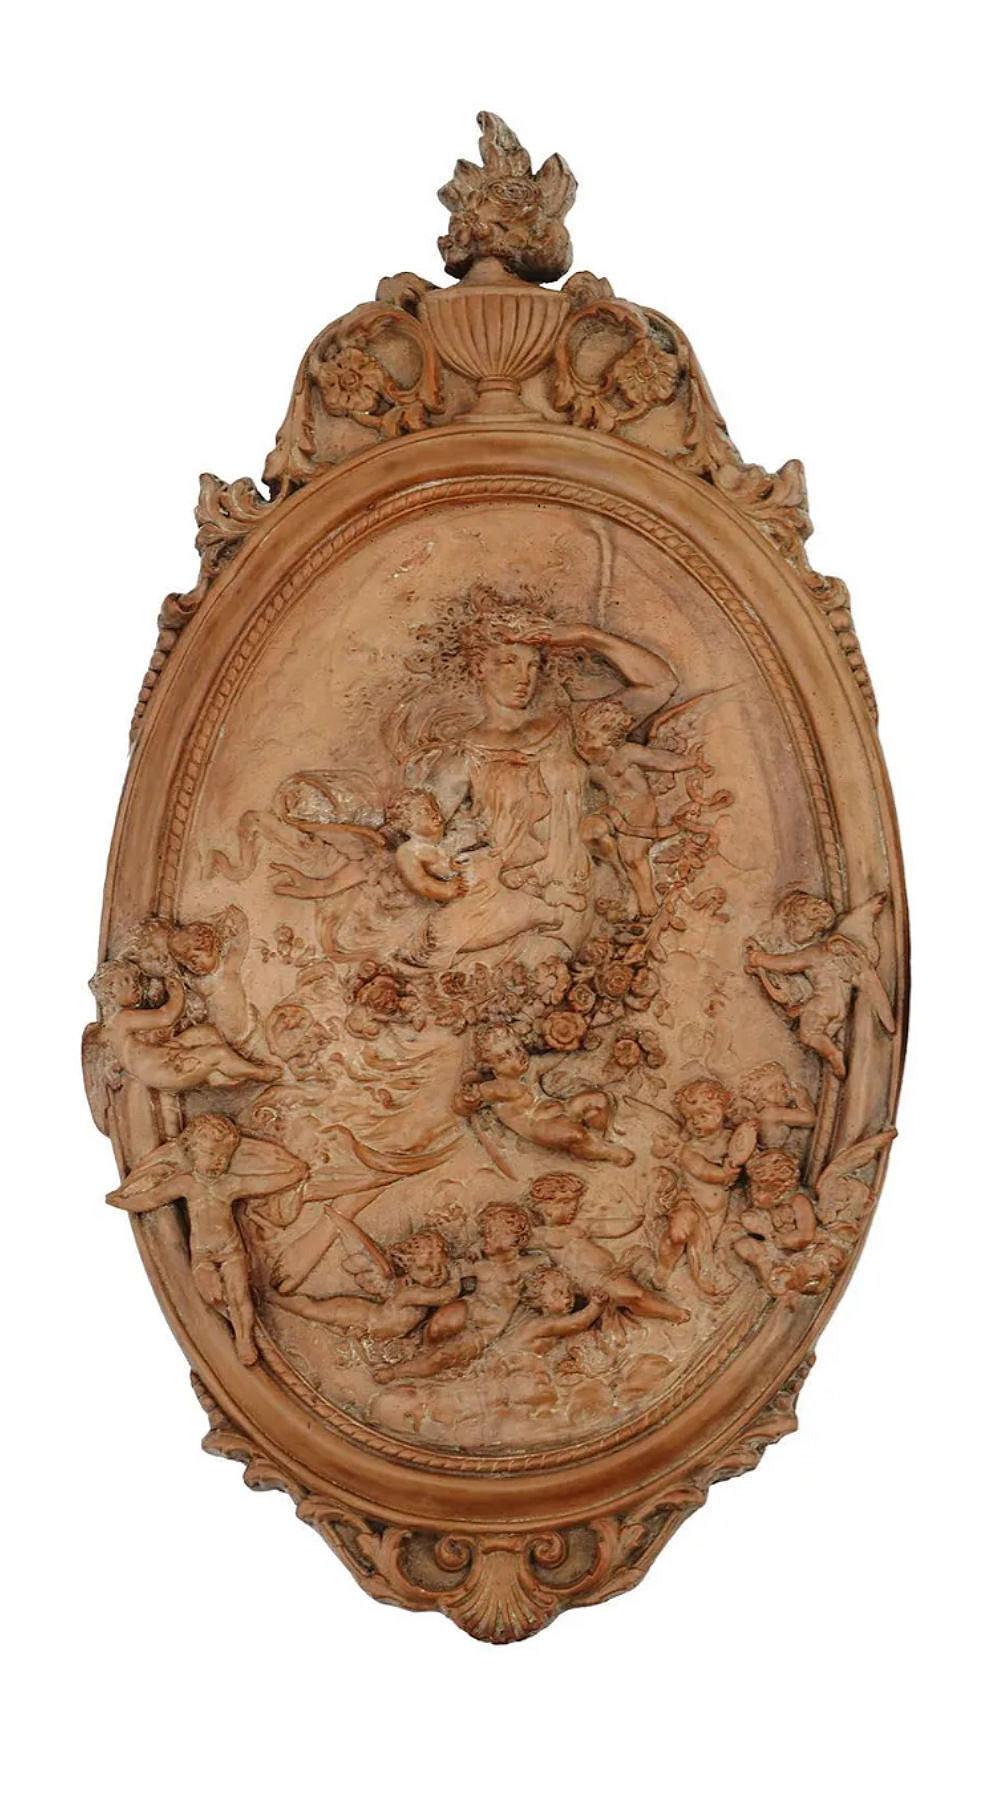 Matched pair of bas-relief plaques in the neoclassical style, molded from terracotta or similar composition, depicting a goddes s among the clouds, surrounded by angels in flight.  
